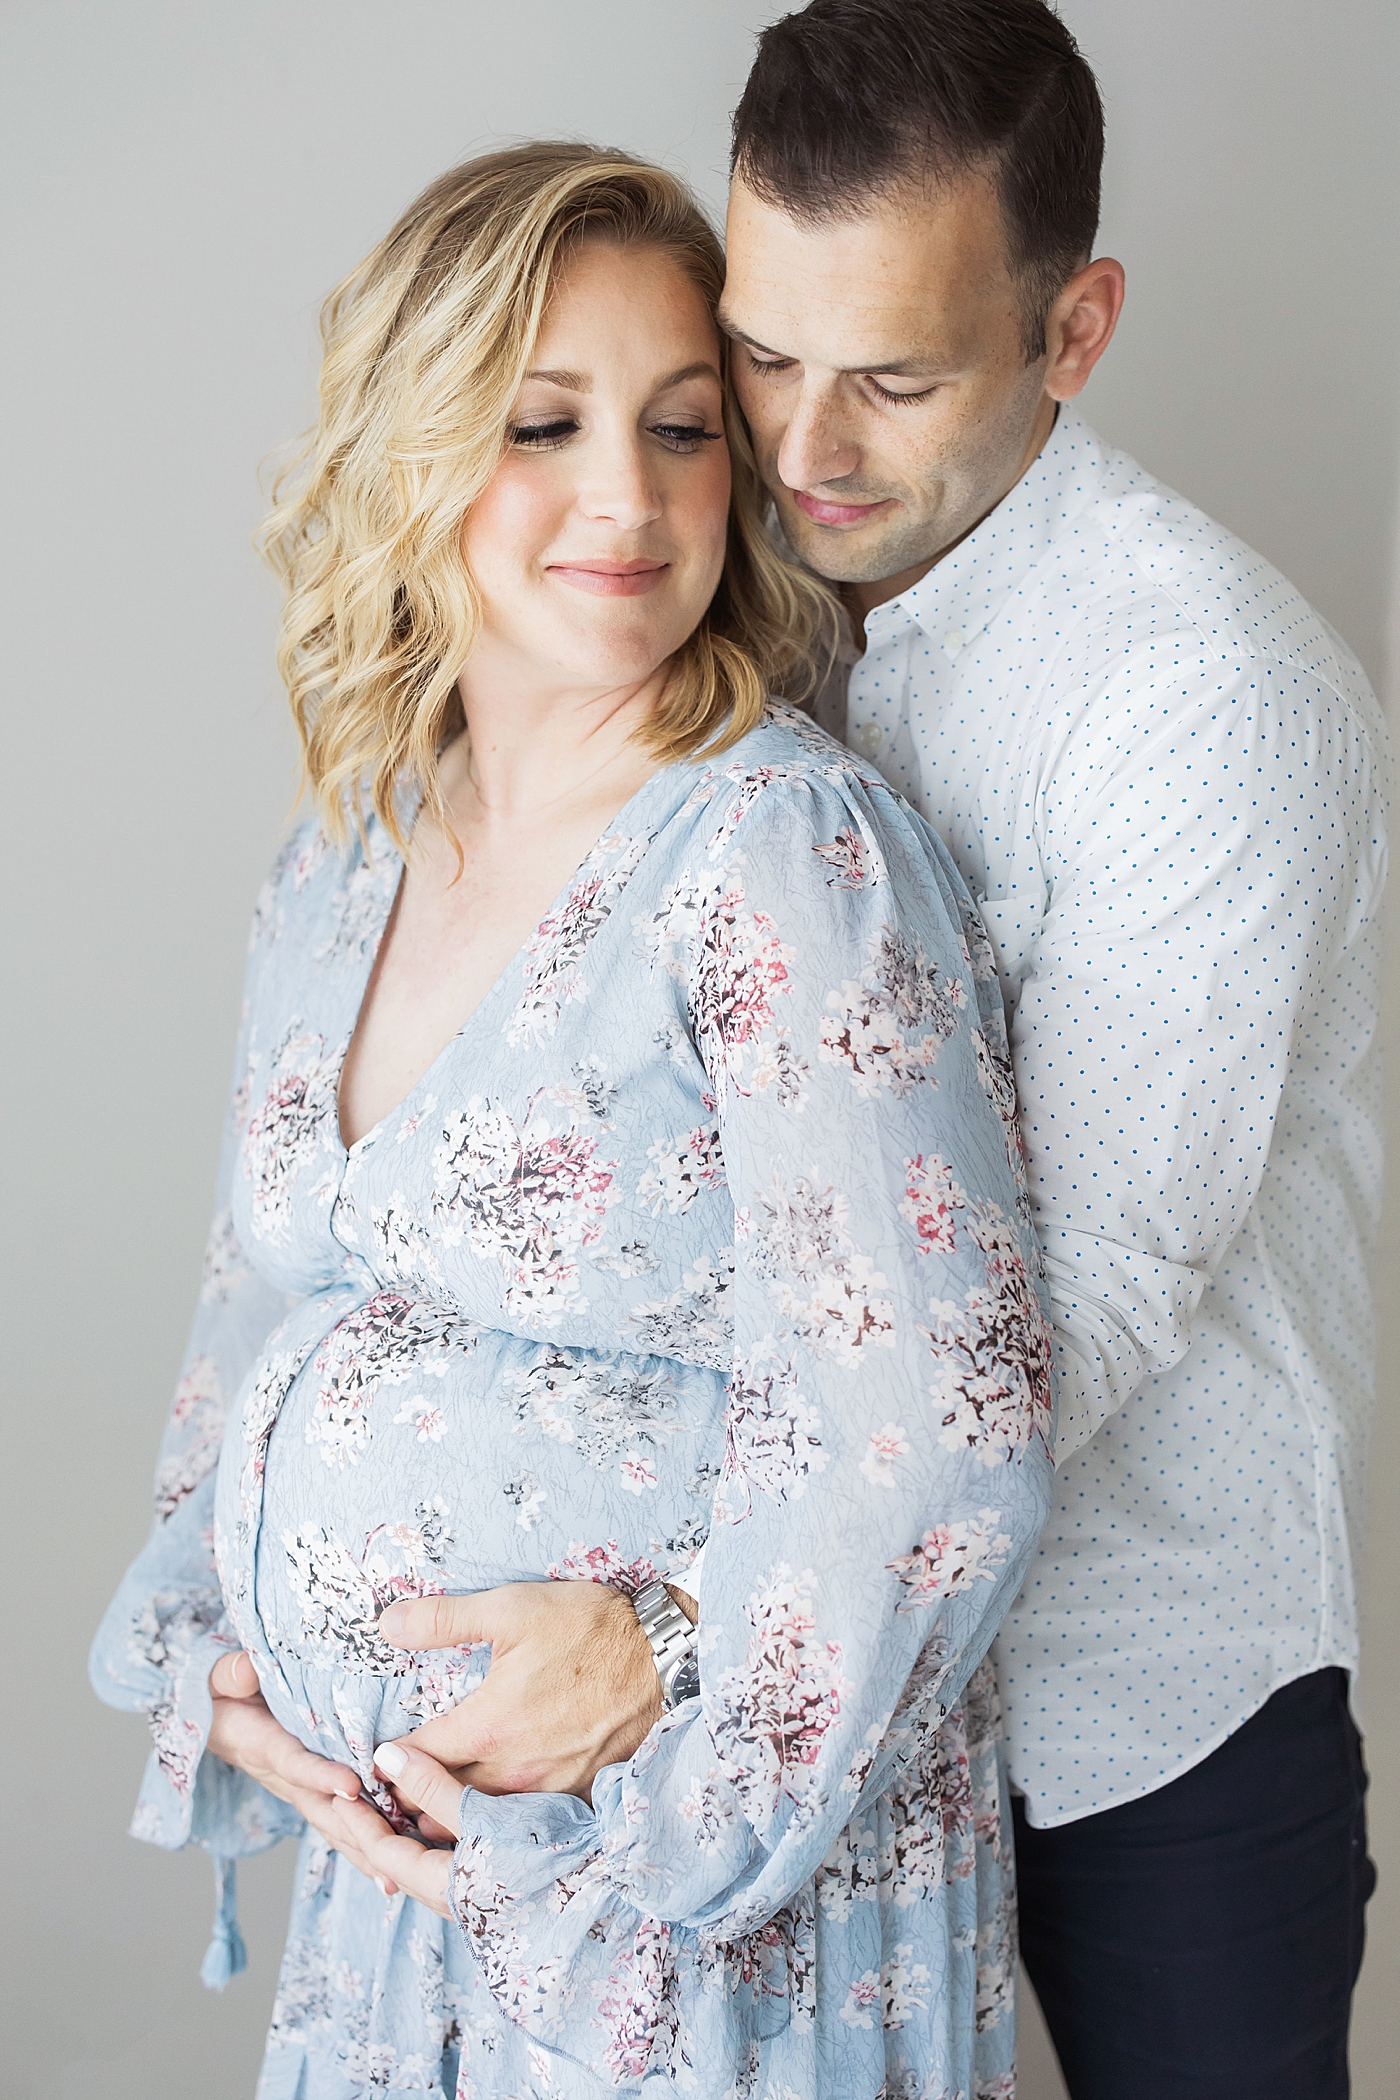 Family maternity session in studio in Houston with Fresh Light Photography.